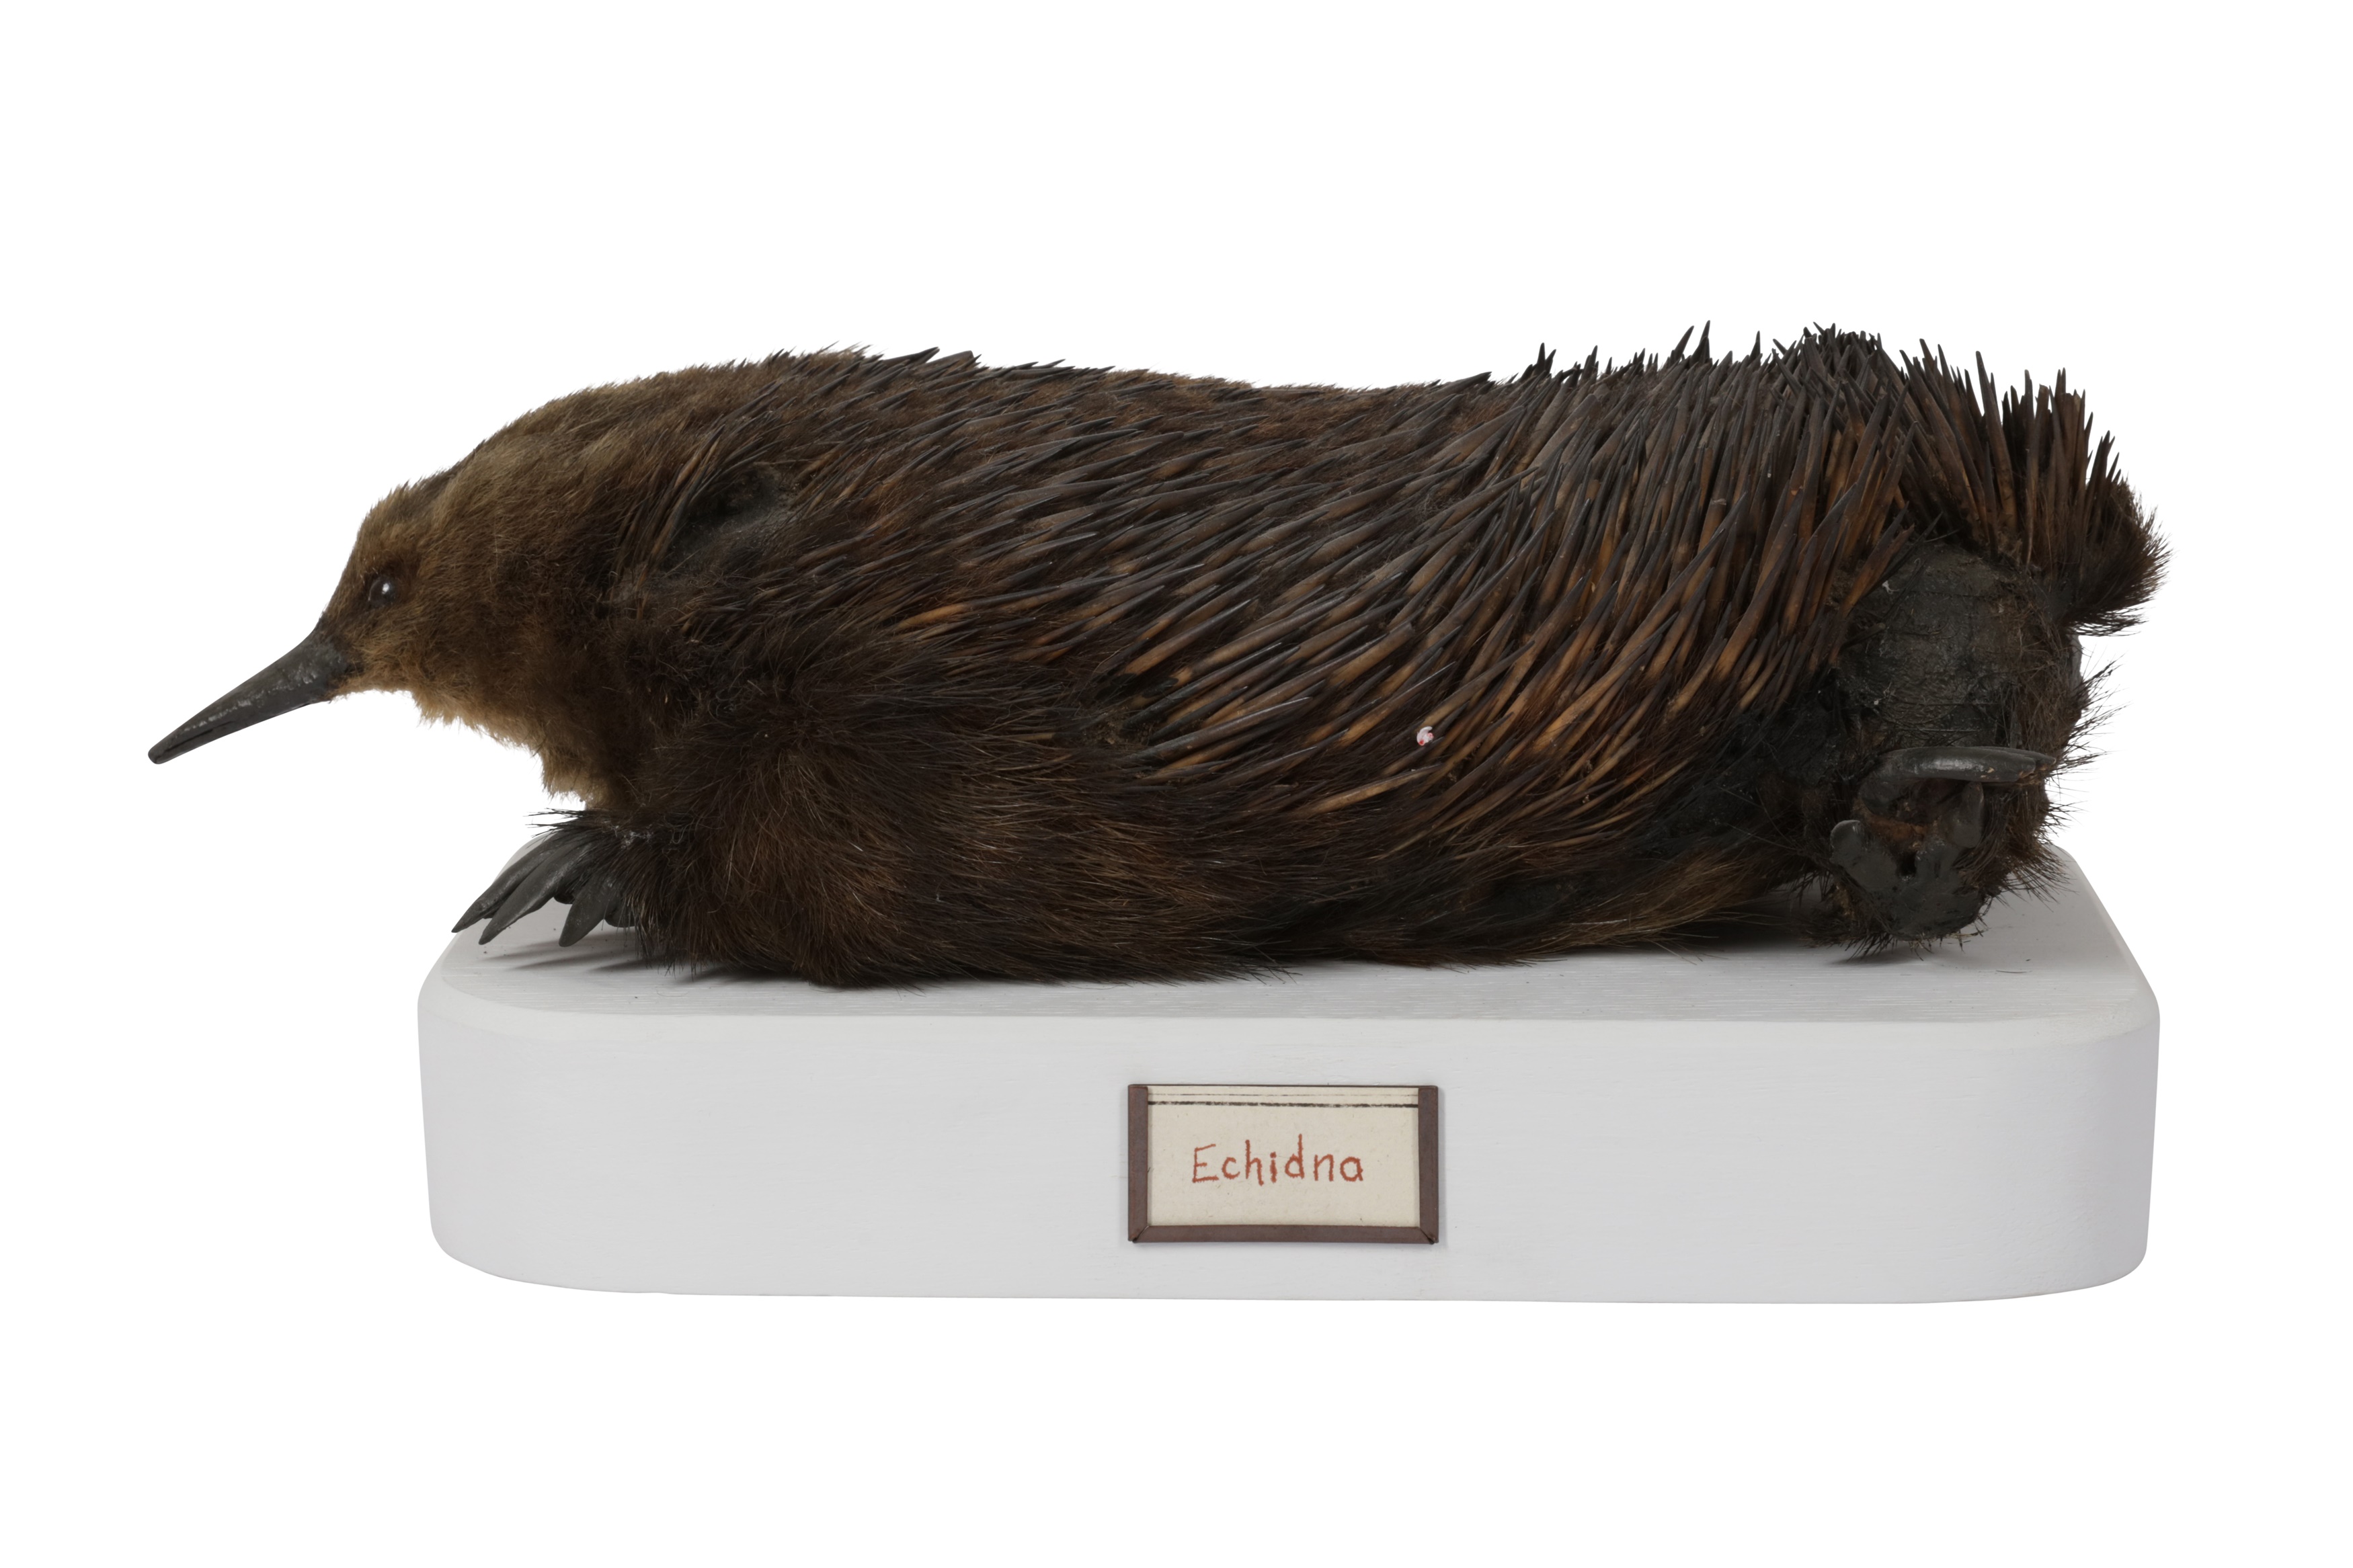 A RARE EARLY 20TH CENTURY TAXIDERMY ECHIDNA (TACHYGLOSSIDAE) - Image 5 of 6